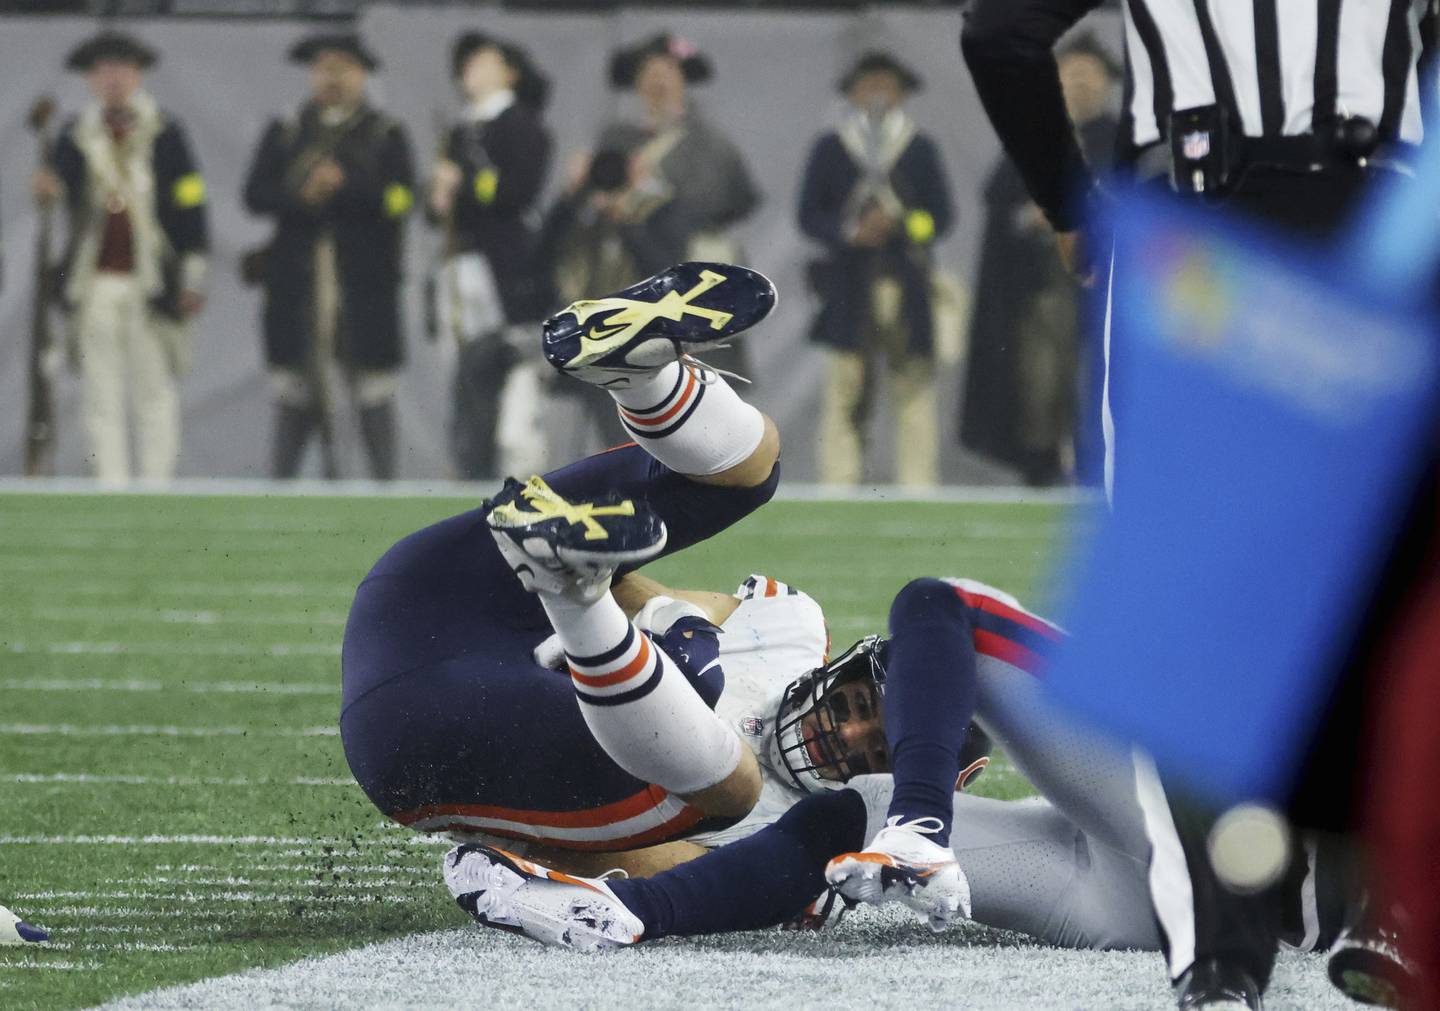 Bears tight end Cole Kmet makes a reception and gets tackled out of bounds in the third quarter against the Patriots on Monday, Oct. 24, 2022, at Gillette Stadium in Foxborough, Mass.